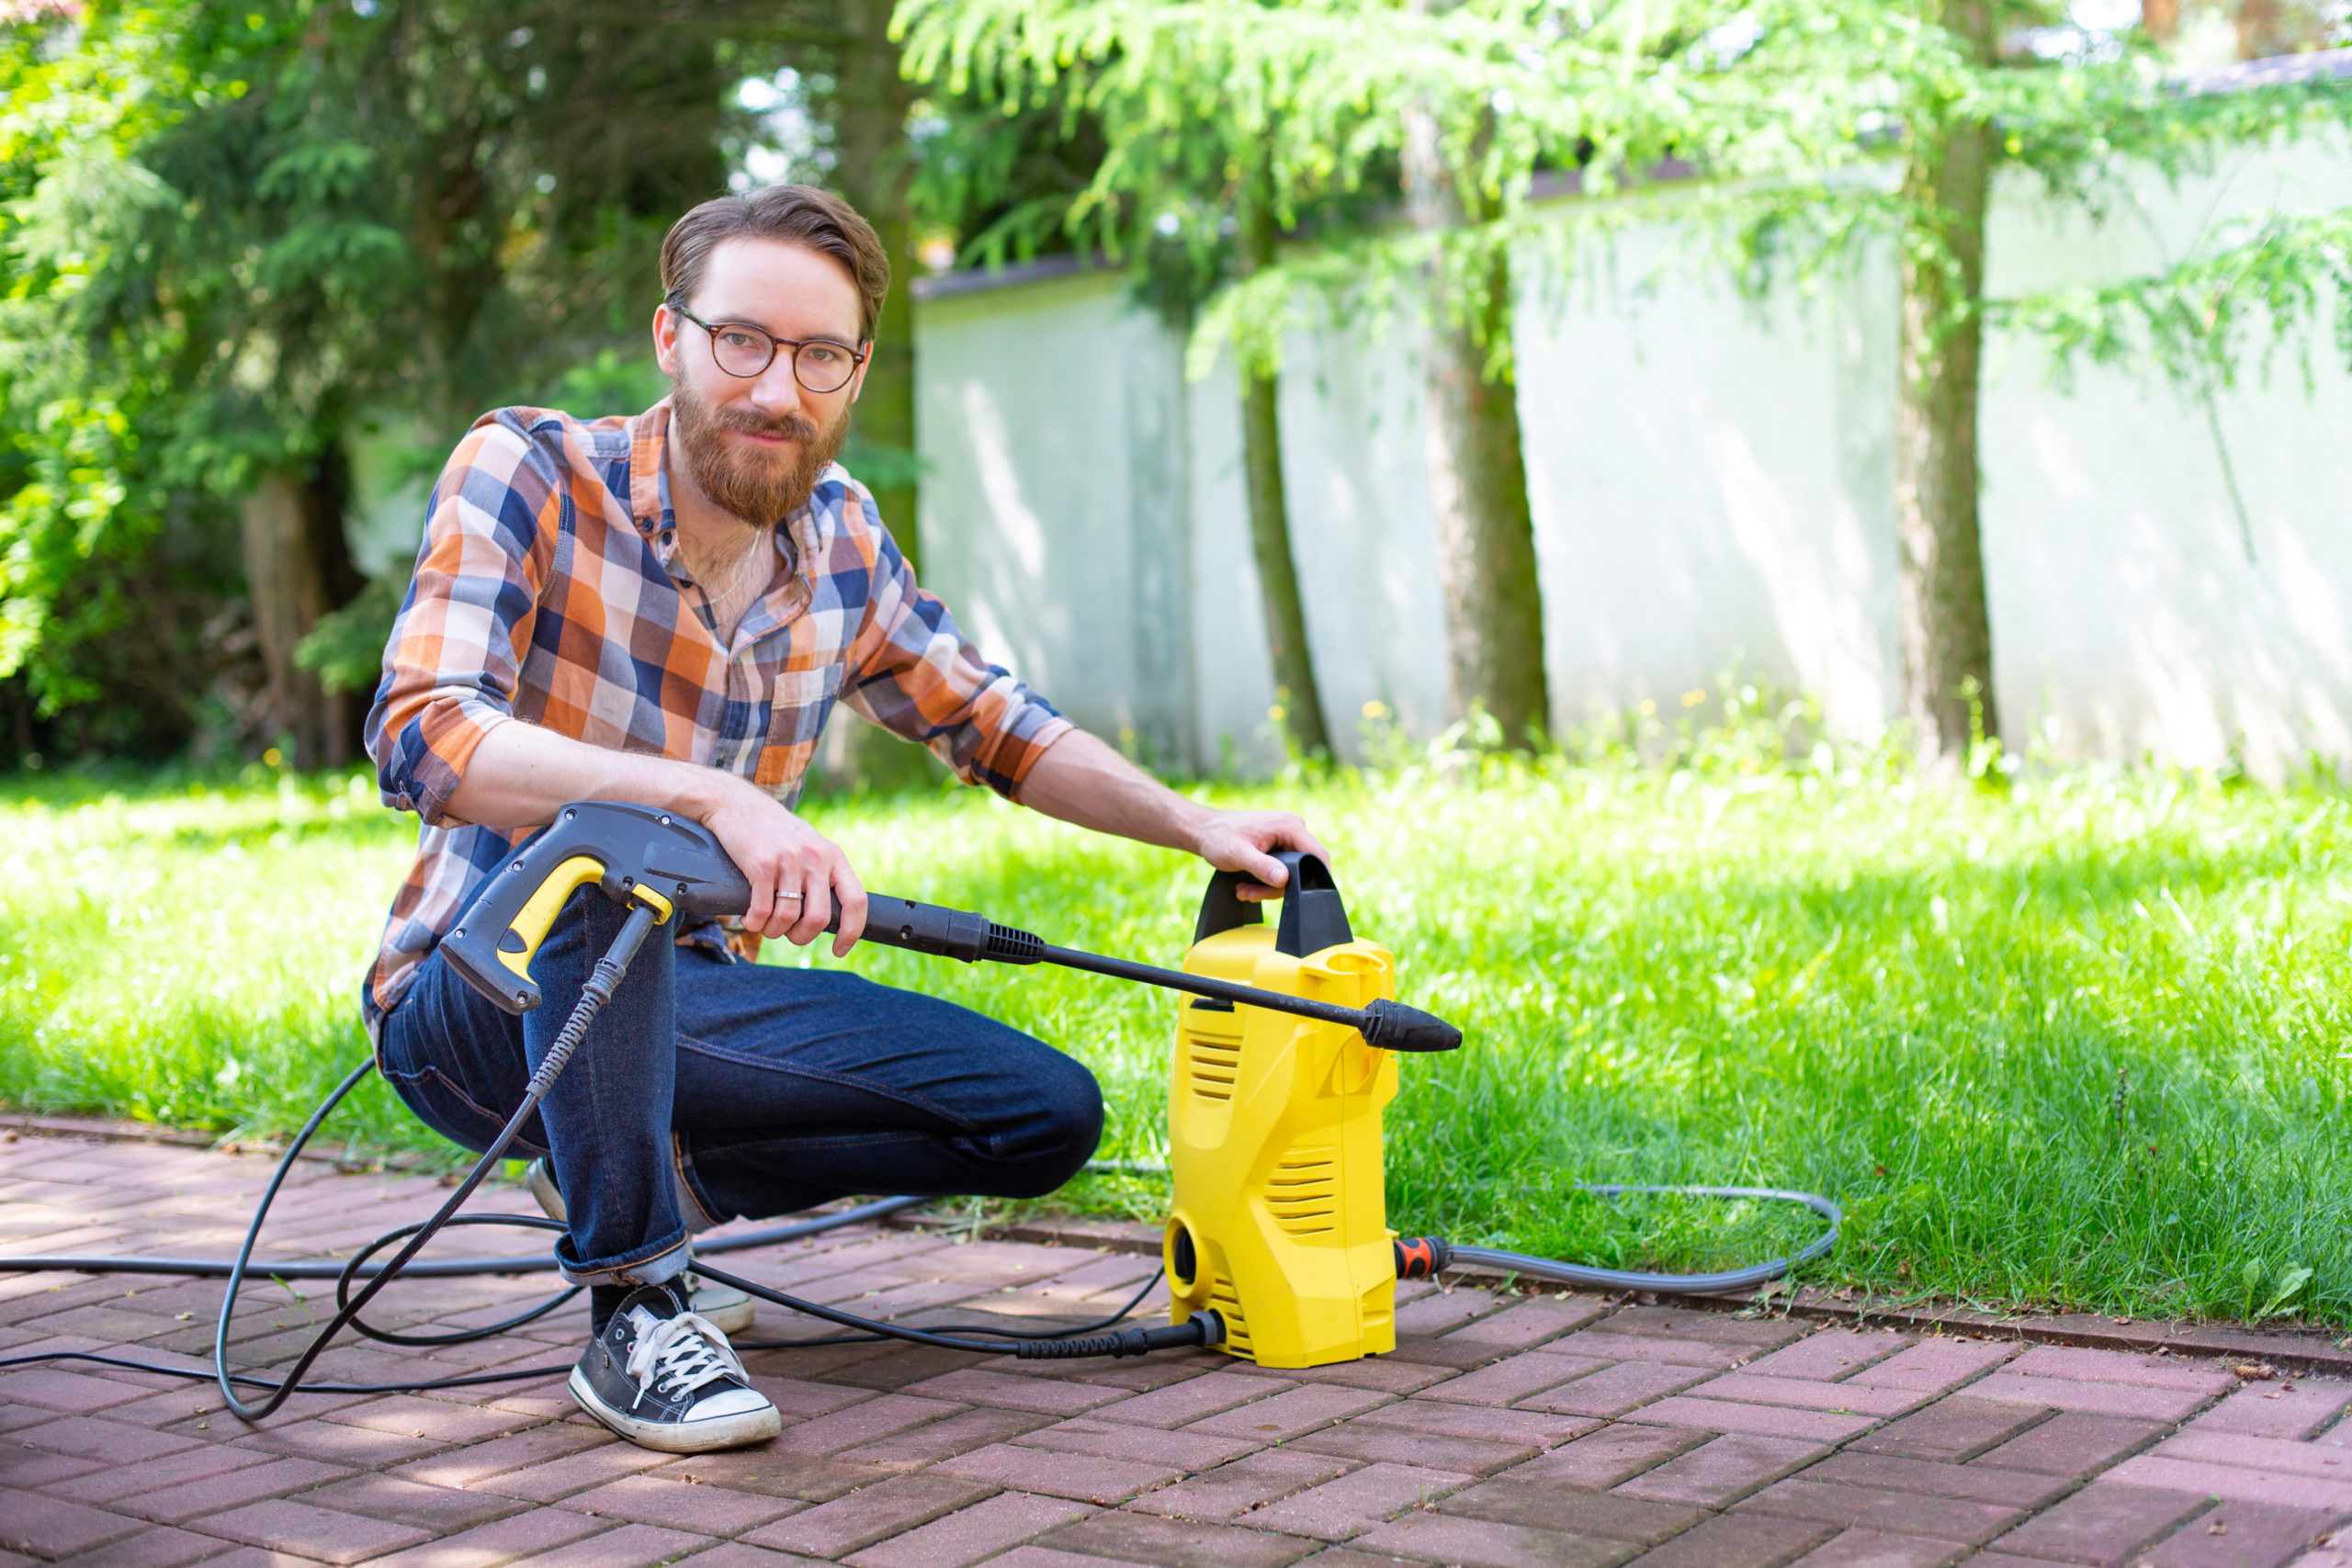 Man using a high pressure washer in the backyard, on a sunny day.